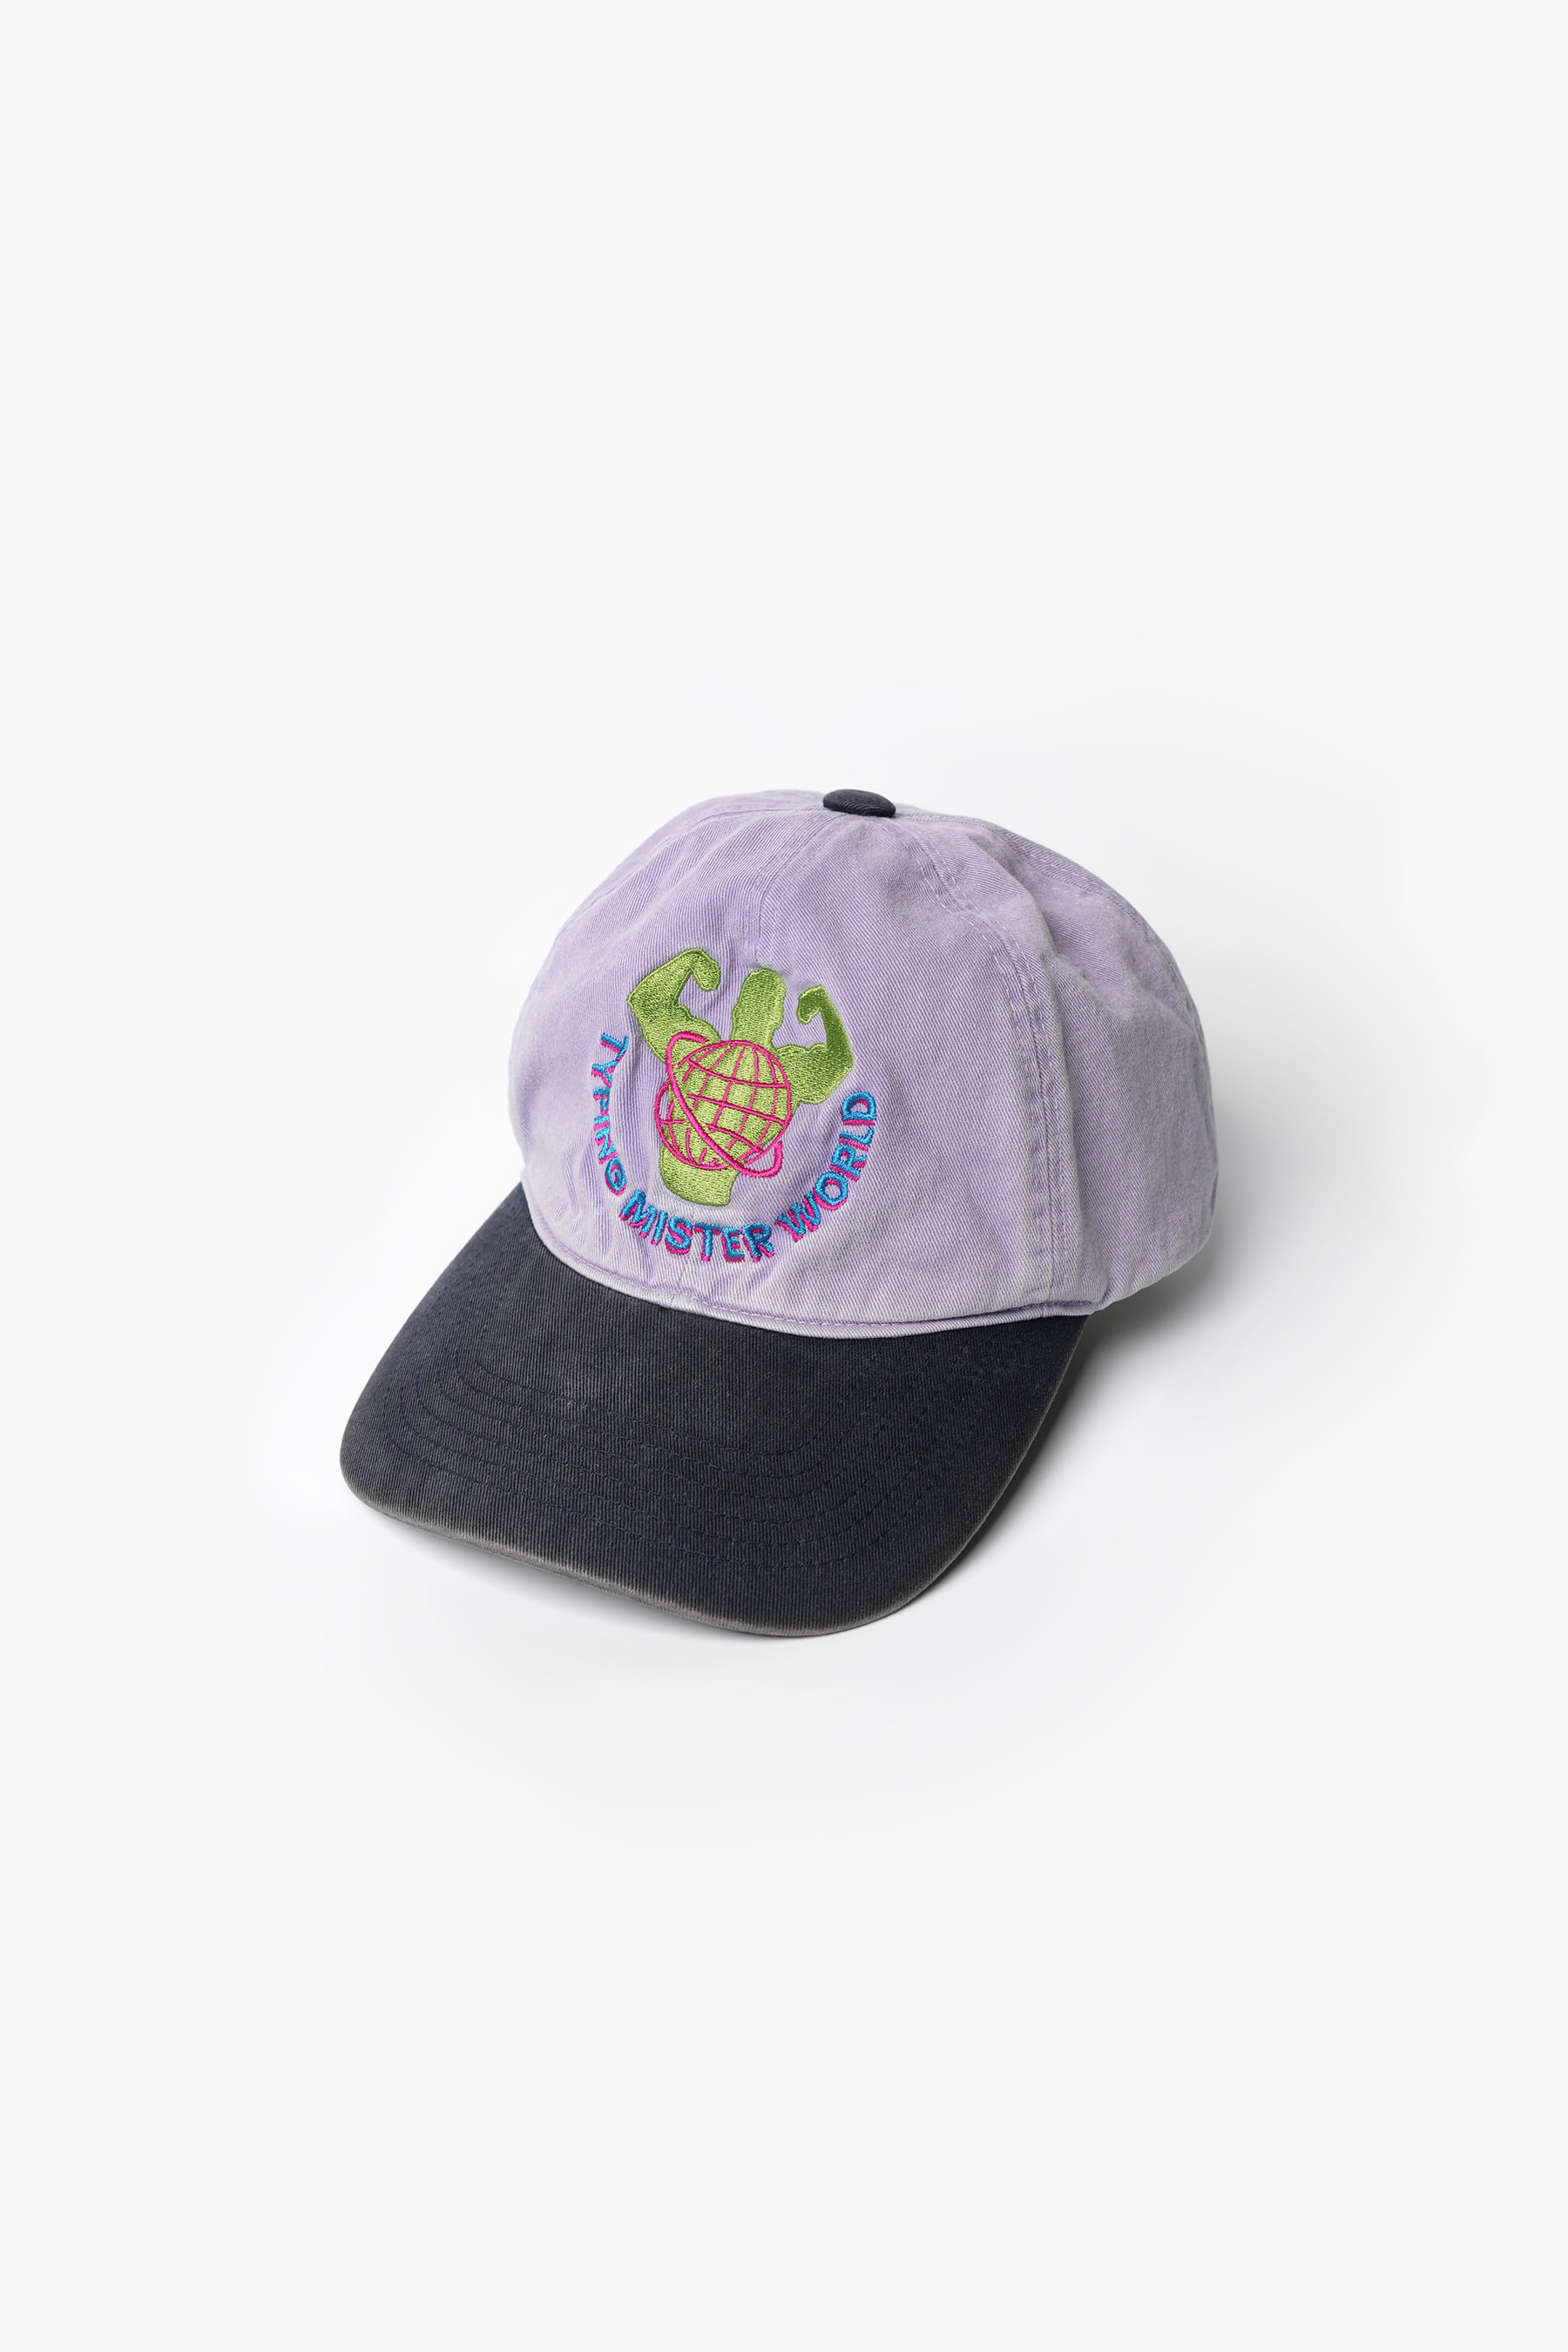 DUSTY LAVENDER/NAVY 80-90’S VNTG CAP (1990’S MUSCULAR GRAPHIC PARODY)